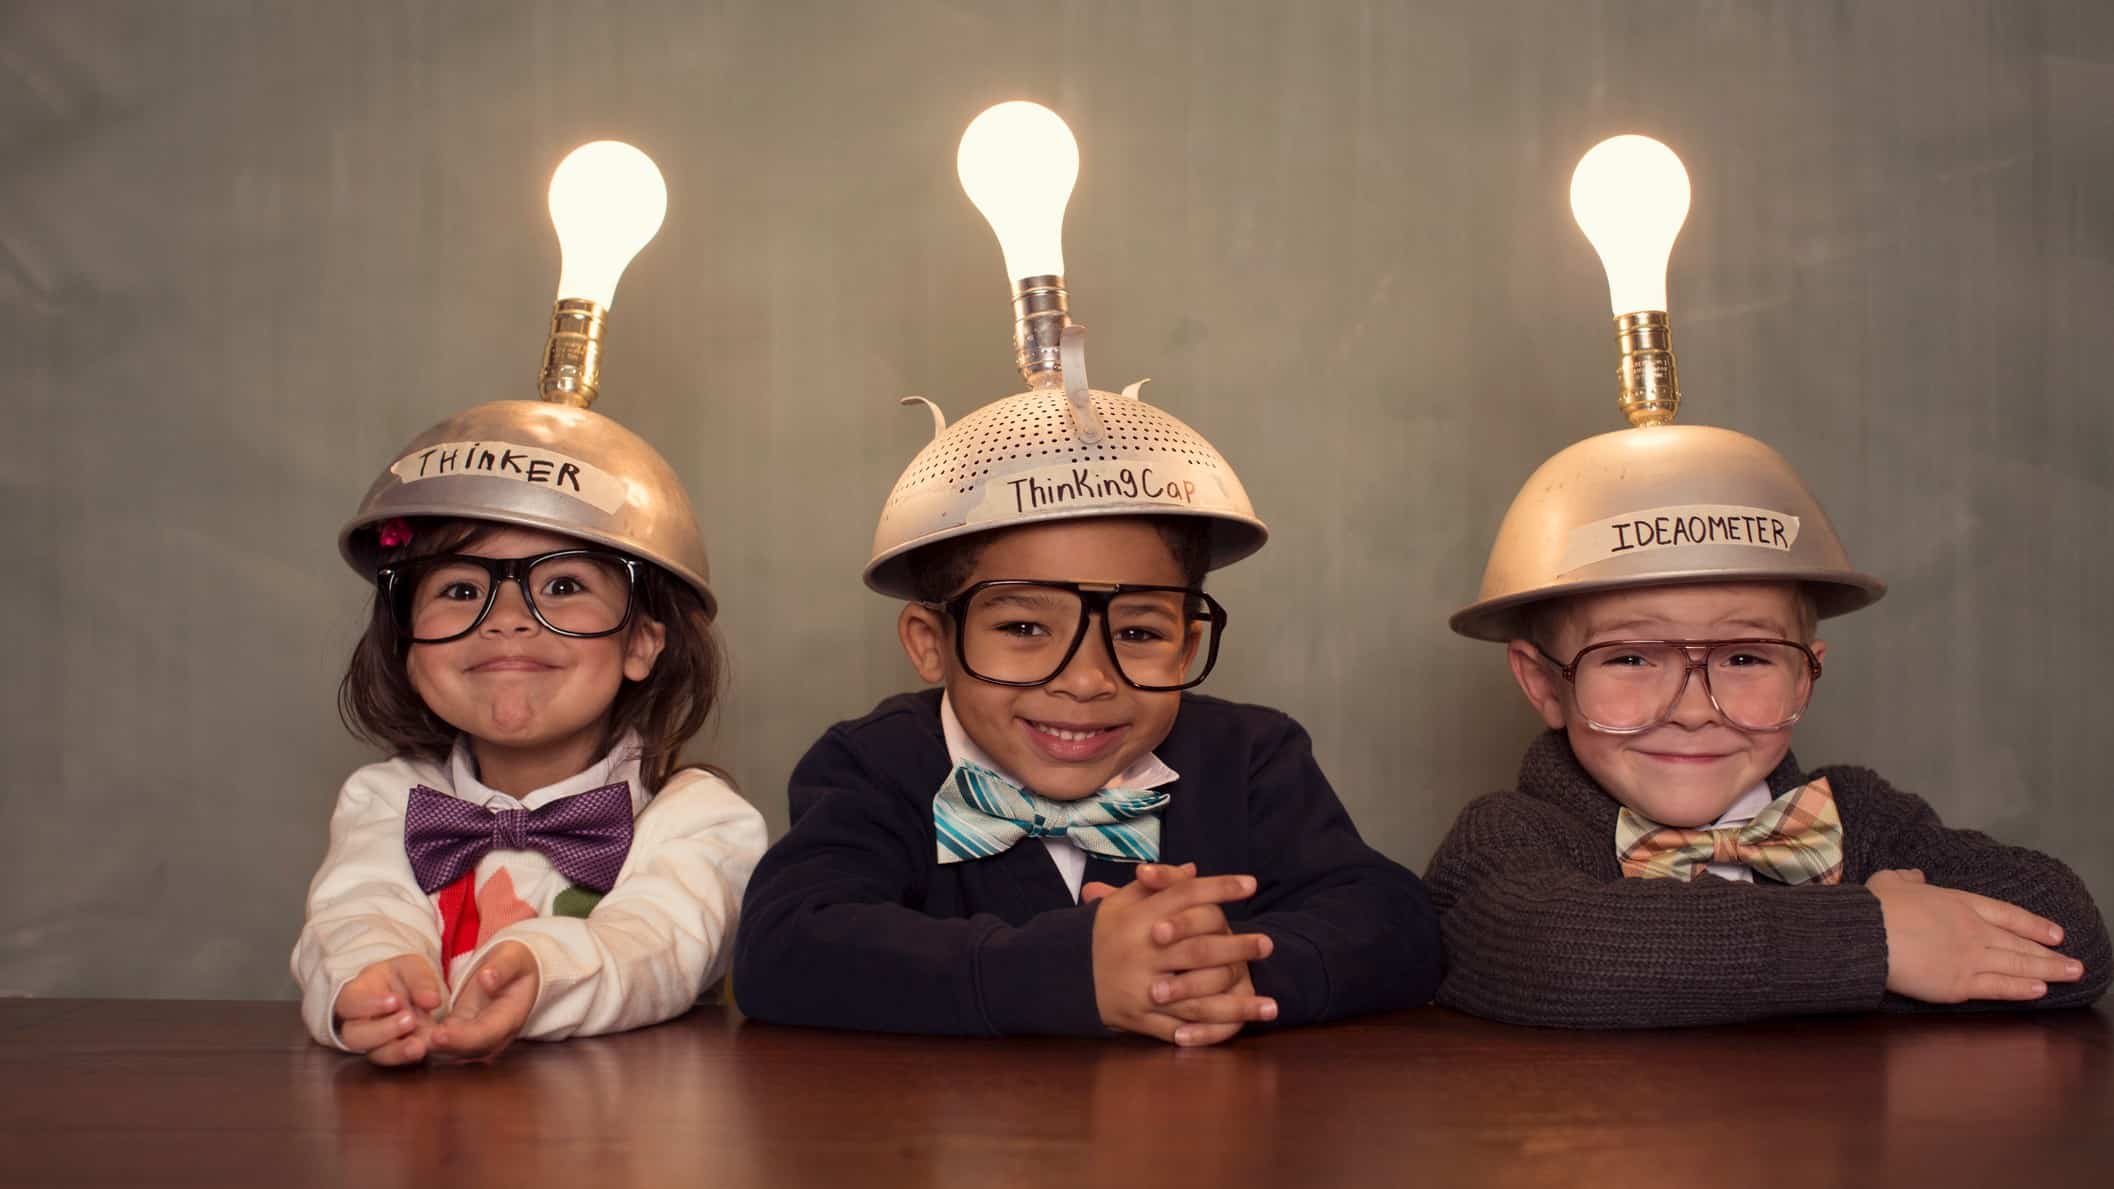 three adorable children sit side by side at a table wearing upturned colanders on their heads fixed with shining light bulbs as they smile cutely at the camera.